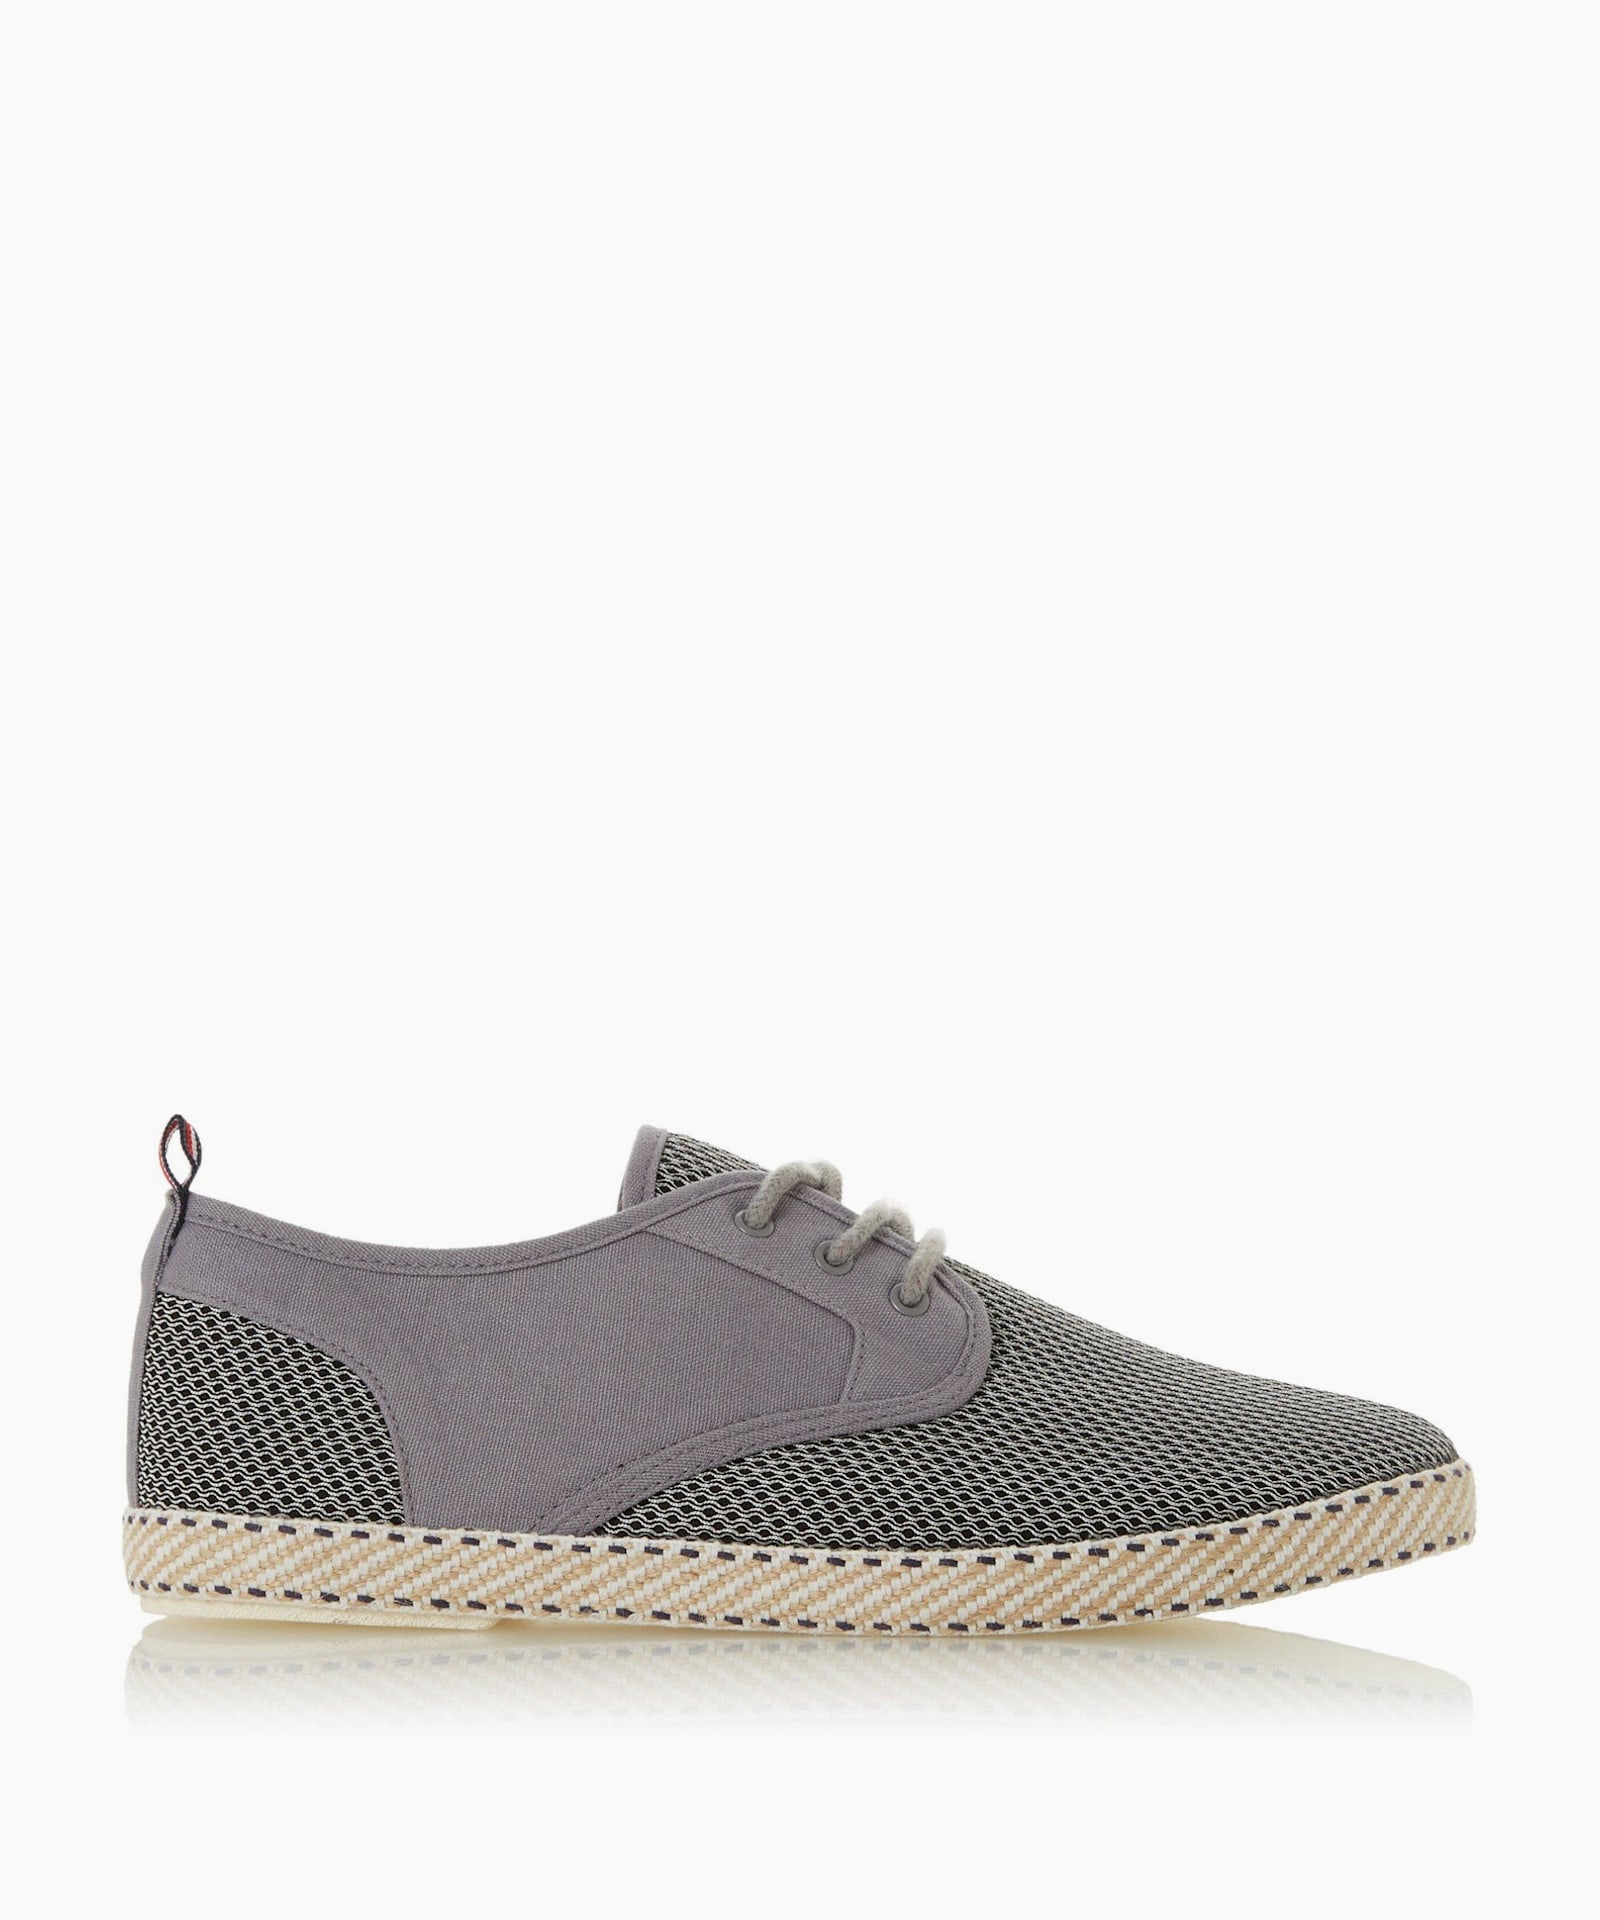 Manebí Synthetic Espadrilles in Grey for Men Mens Shoes Slip-on shoes Espadrille shoes and sandals 